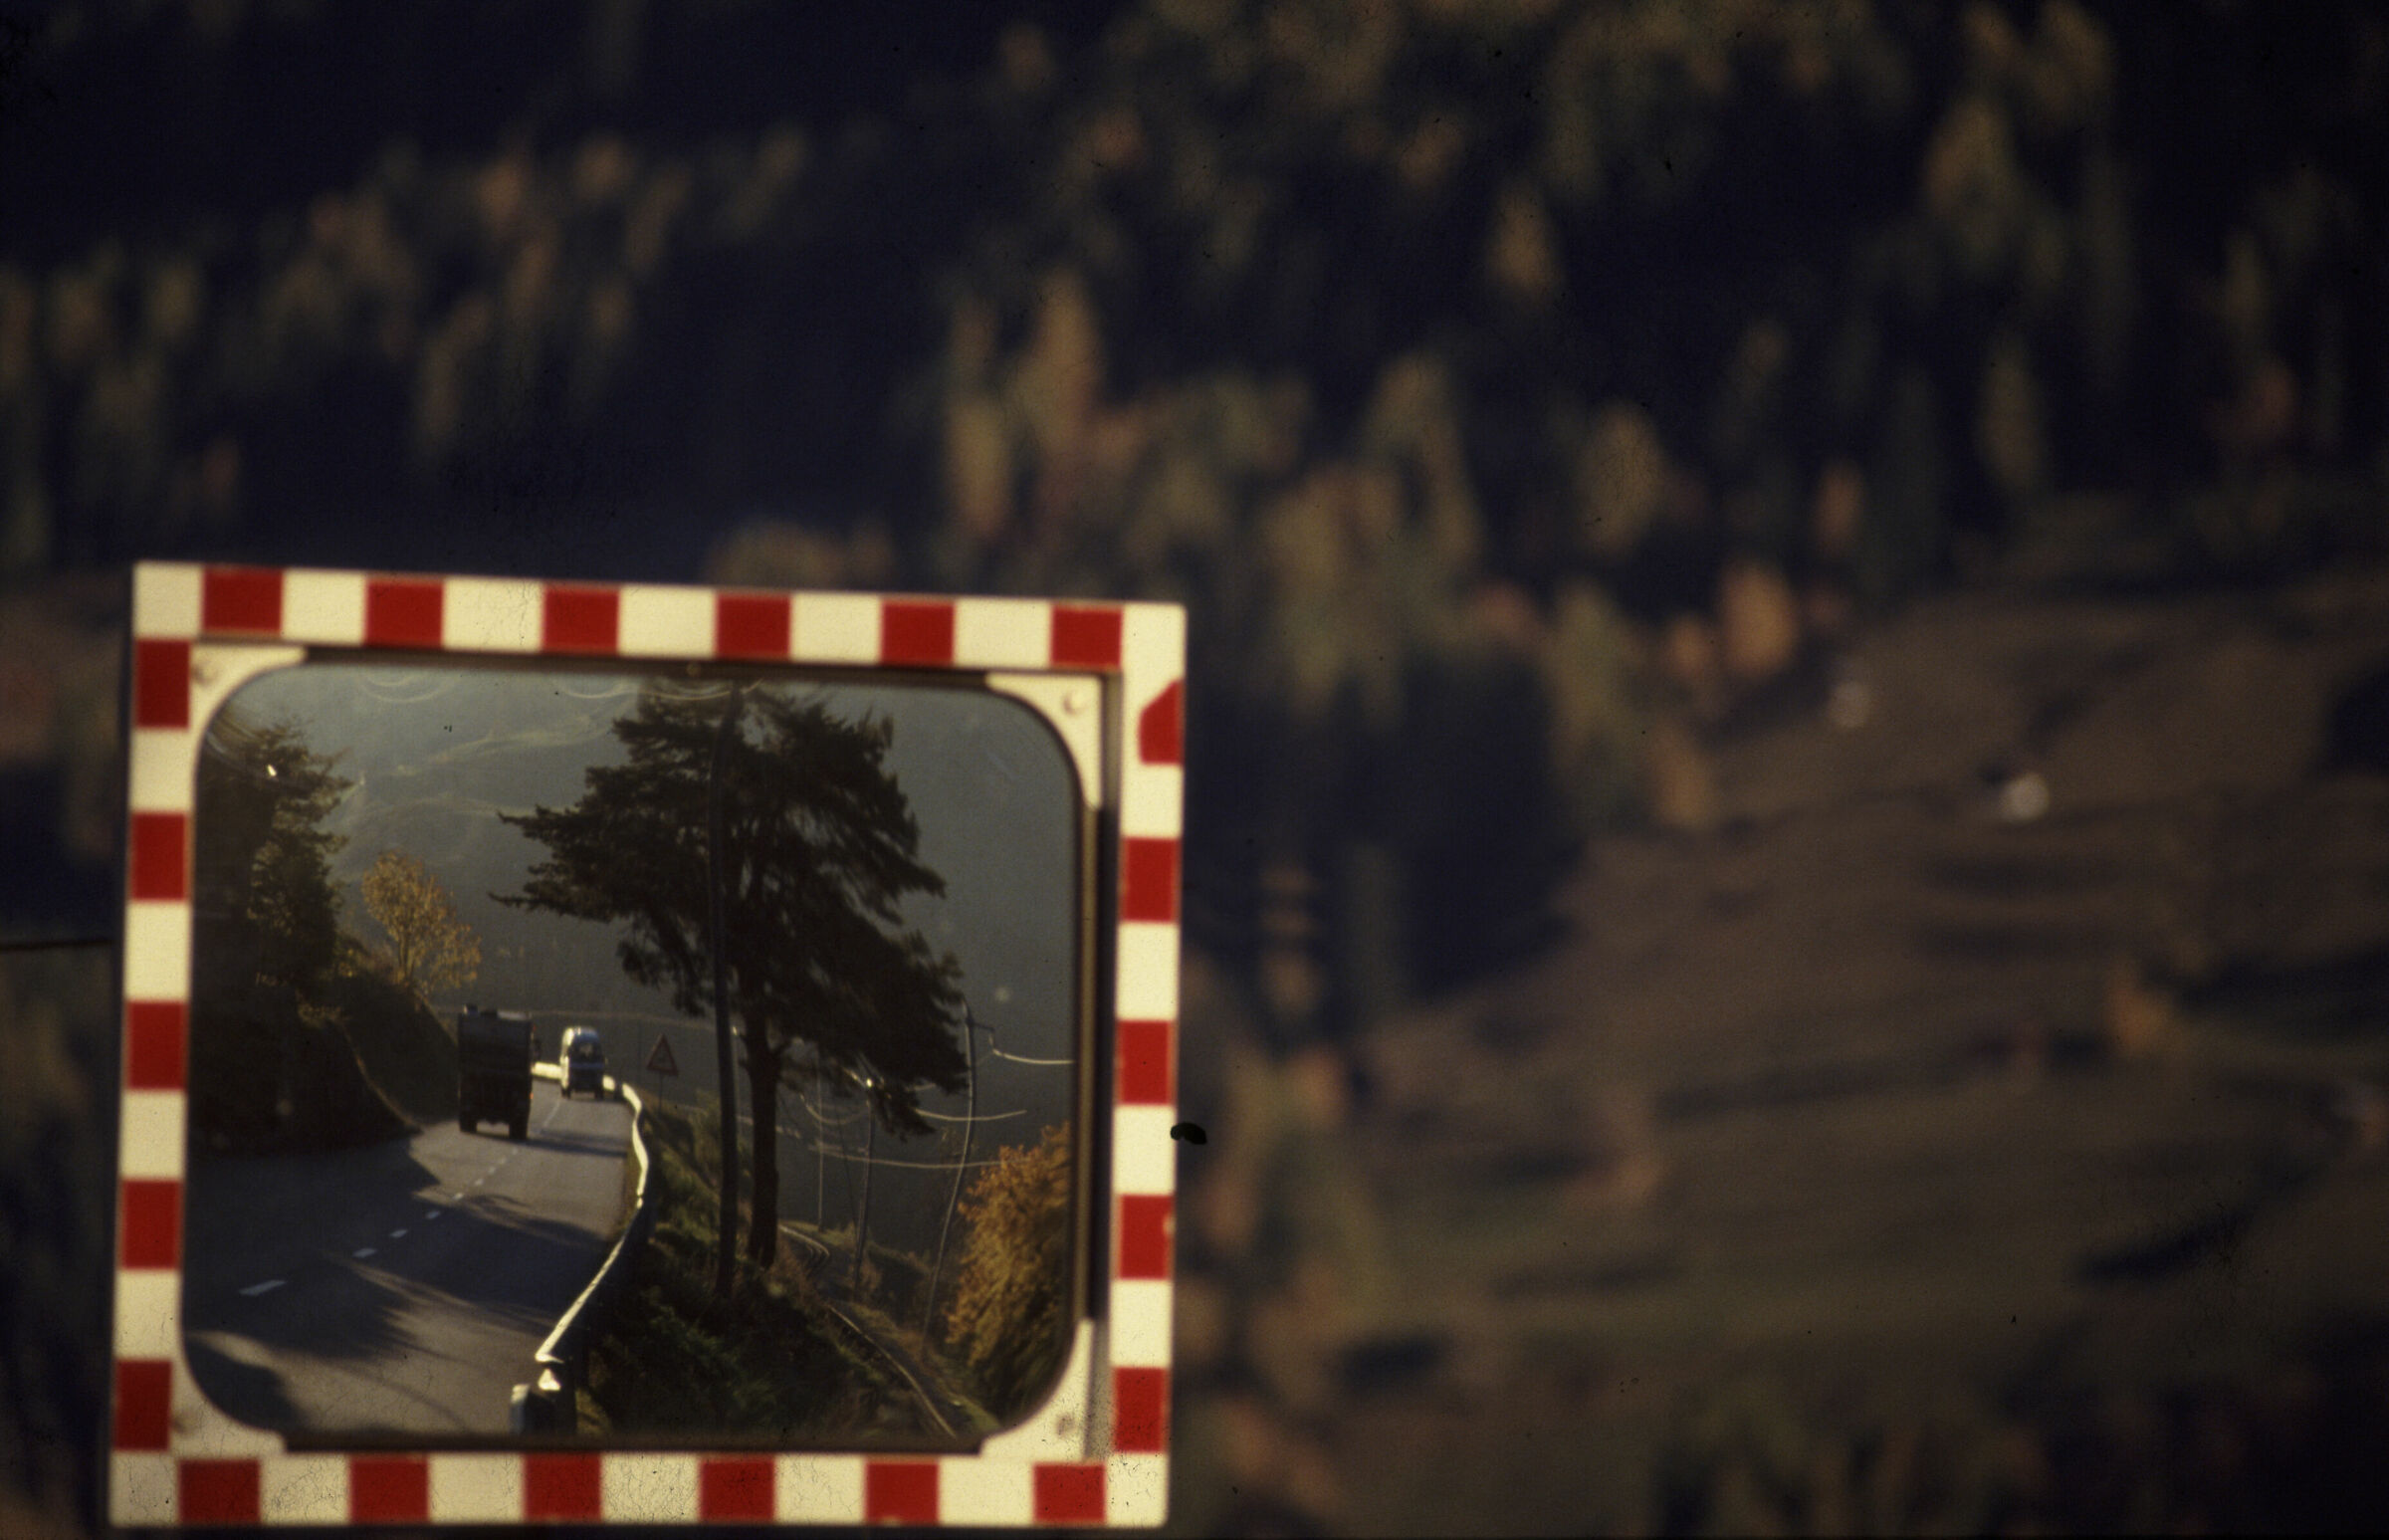 The Mirror on the road...